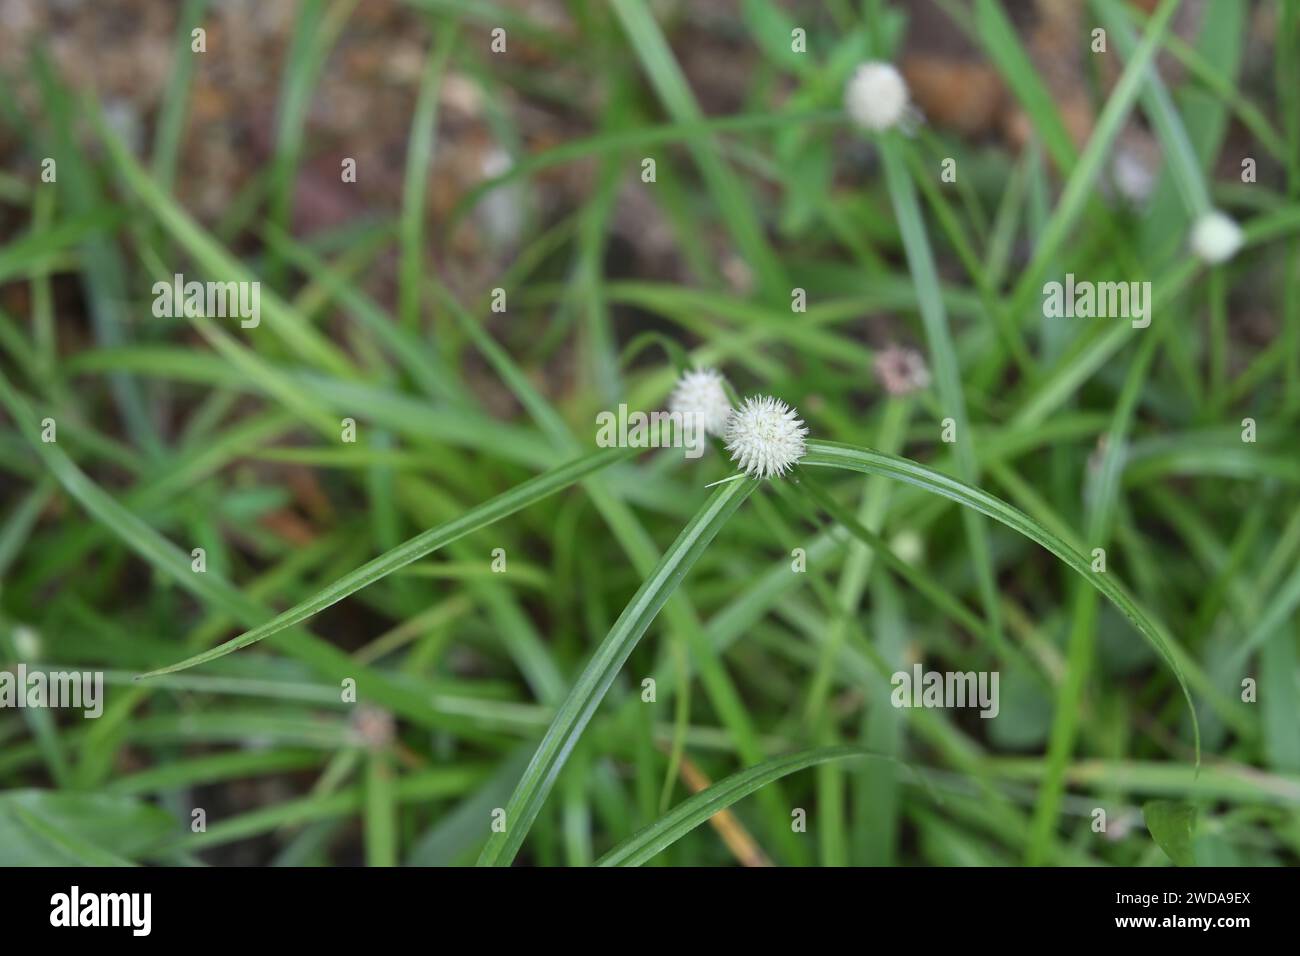 Top view of a small round white flower (flowering head) of a White water sedge (Kyllinga nemoralis) weed plant Stock Photo